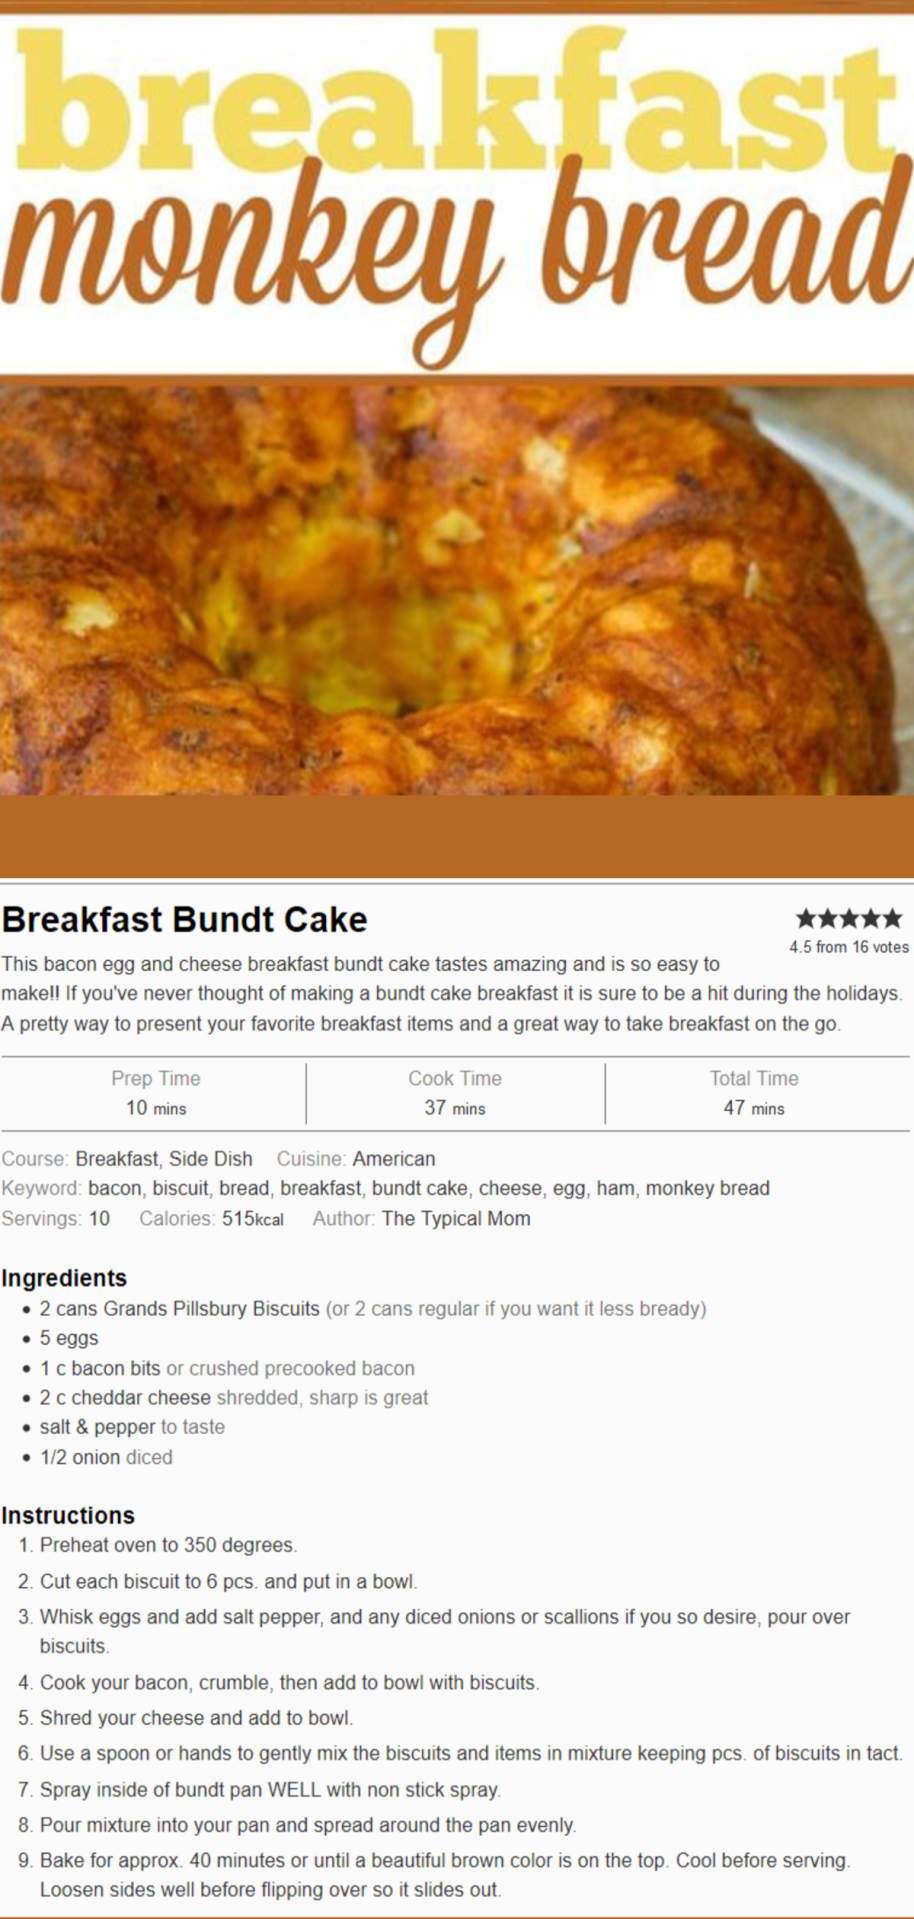 This breakfast bundt cake recipe has bacon, egg, and cheese and uses Pillsbury Grands biscuits as the bread part.  EASY breakfast recipe for guests, brunch...makes a simple Christmas morning recipe idea too.  We LOVE Monkey Bread in this house!